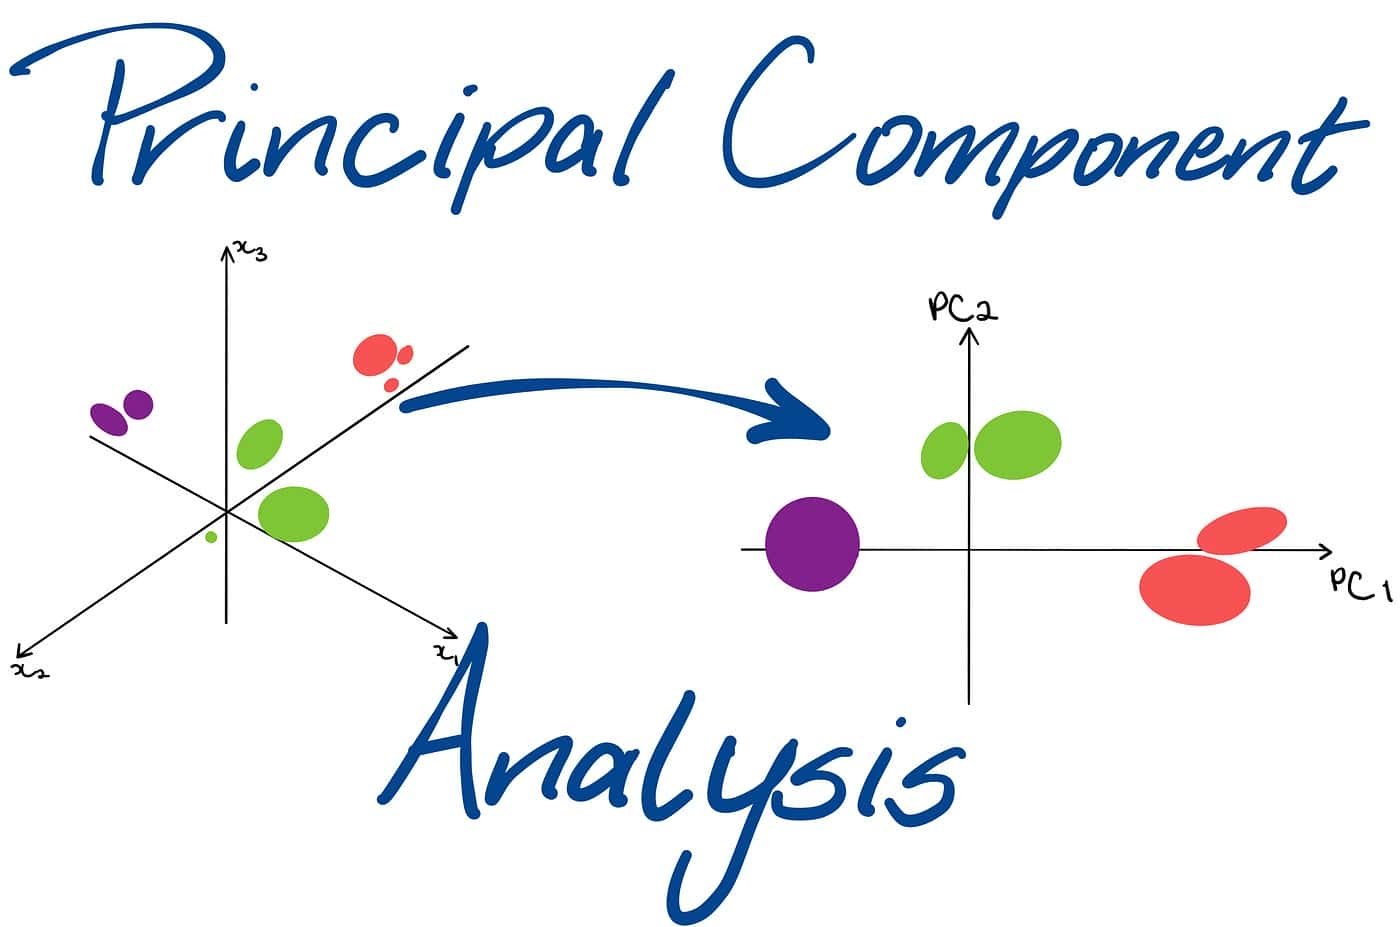 A Step-By-Step Complete Guide to Principal Component Analysis | PCA for Beginners